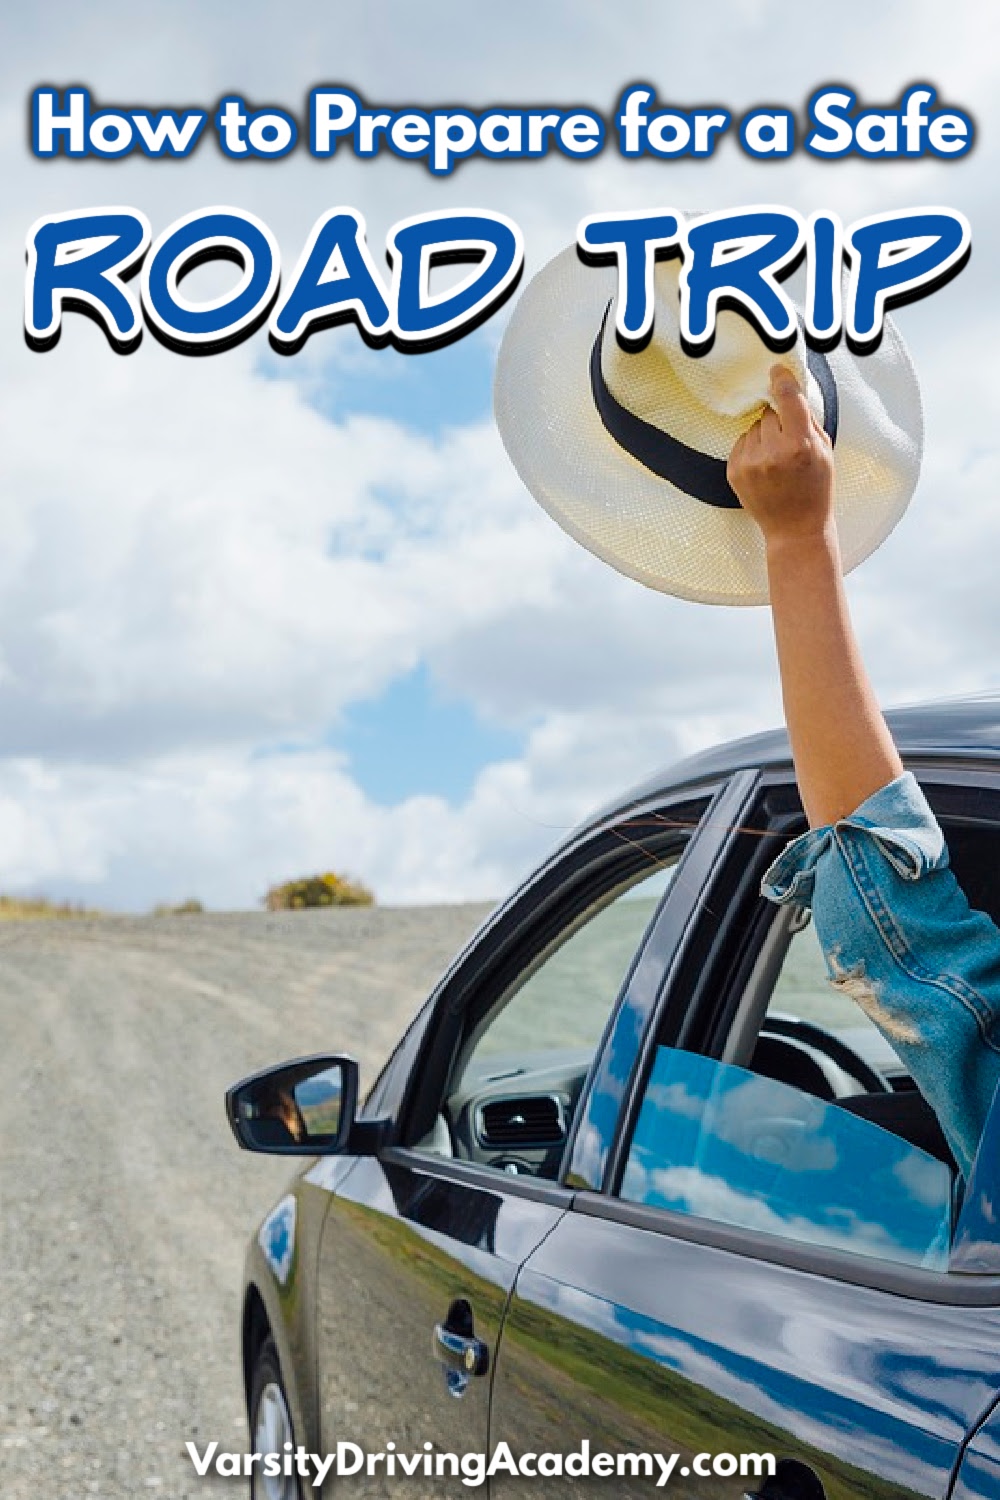 Learning how to prepare for a safe road trip can help ensure you enjoy your journey and make it home safely.